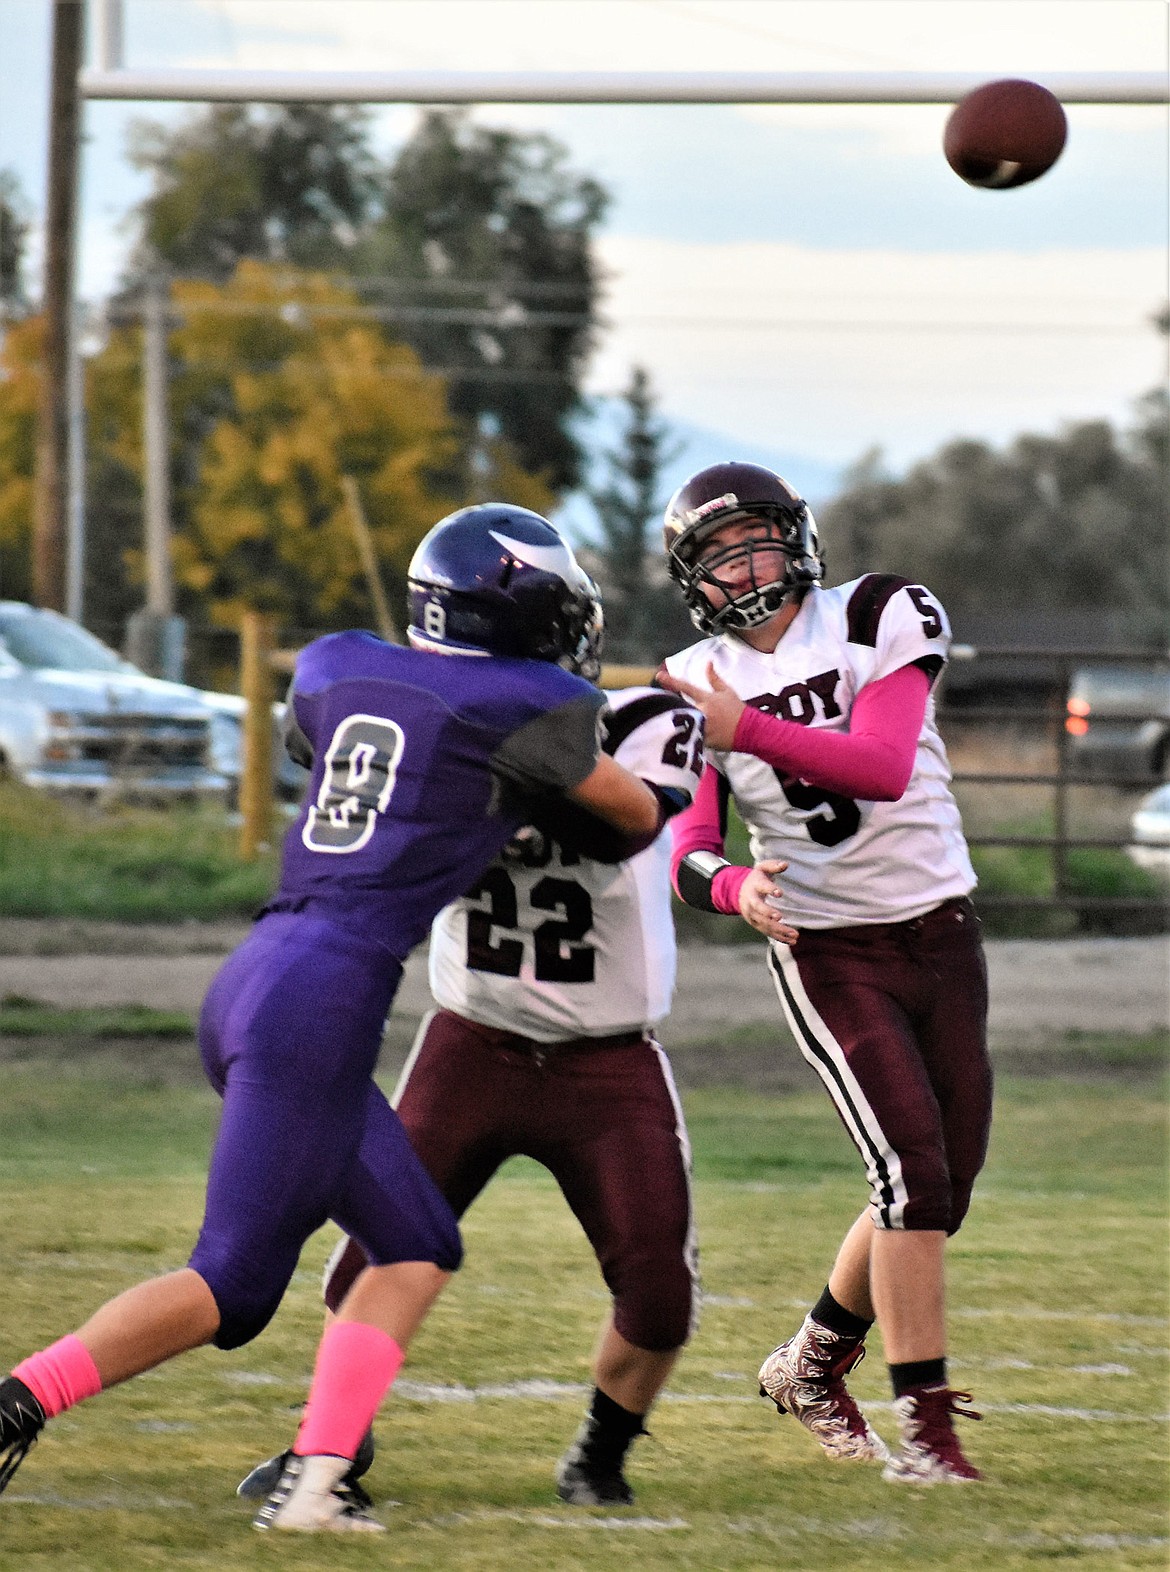 Troy quarterback Cody Osterberg gets off a pass as his teammate Cy Winslow defends him against Charlo's Shad Anderson during Friday night's game in Charlo. (Photo by Svetlana Harper)